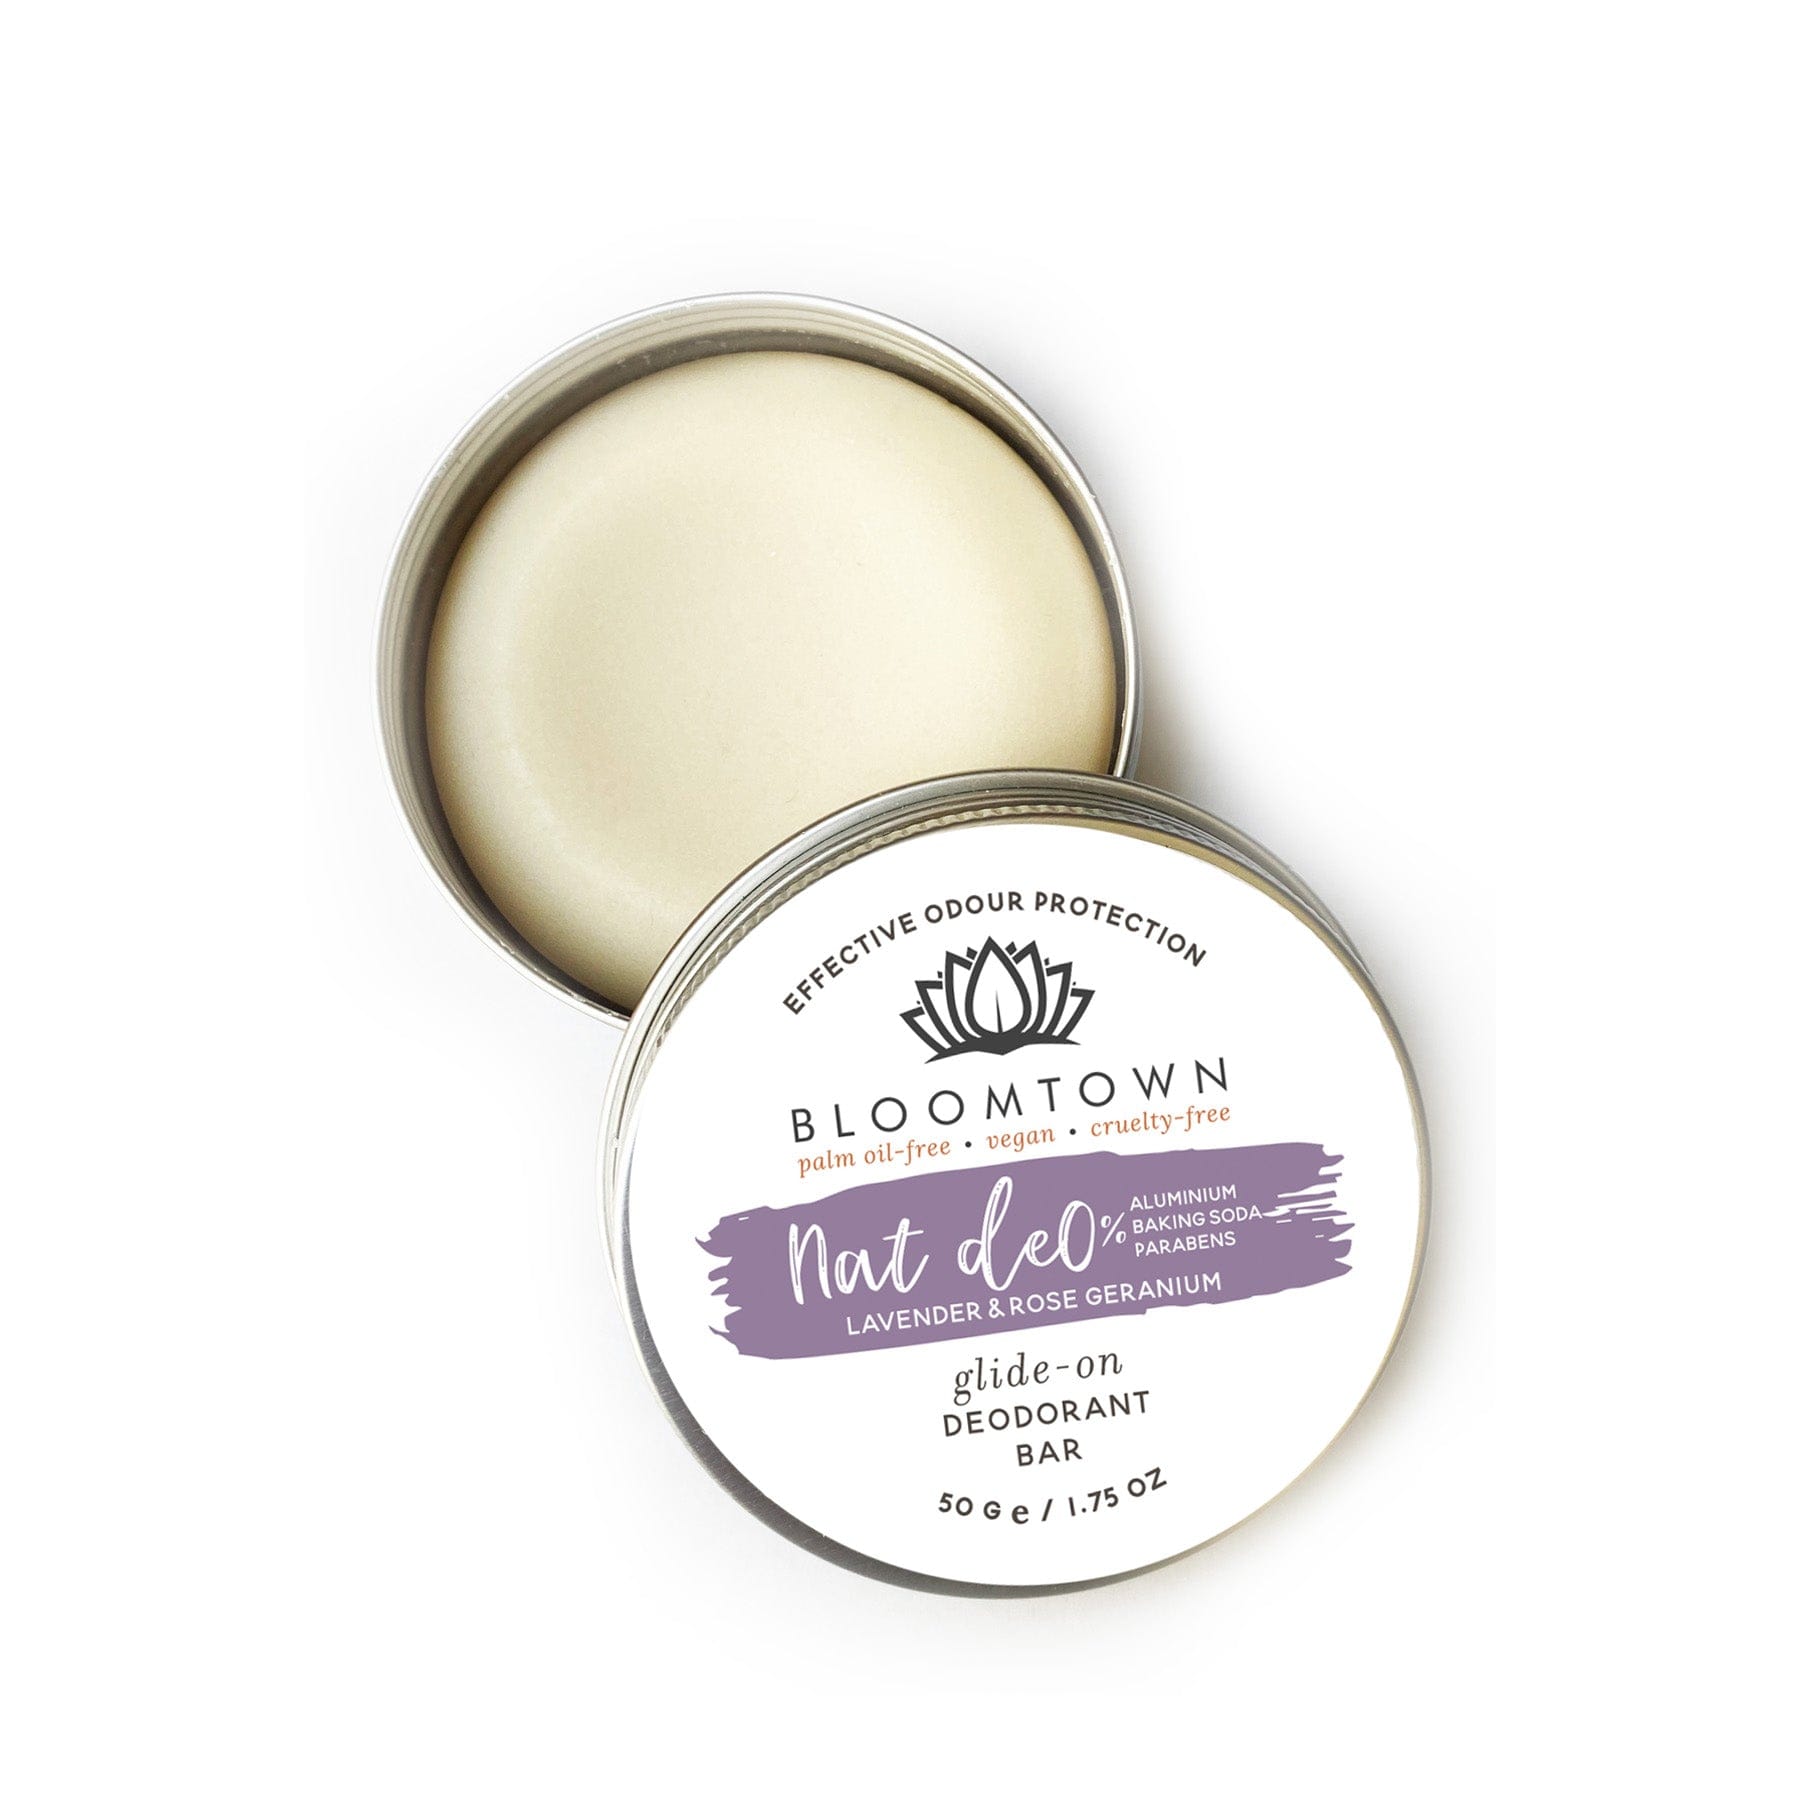 Natural deodorant Bloomtown Lavender & Rose Geranium in open tin container, aluminum-free, baking soda-free, paraben-free, palm oil-free, vegan, cruelty-free, effective odor protection, glide-on deodorant bar 50g.